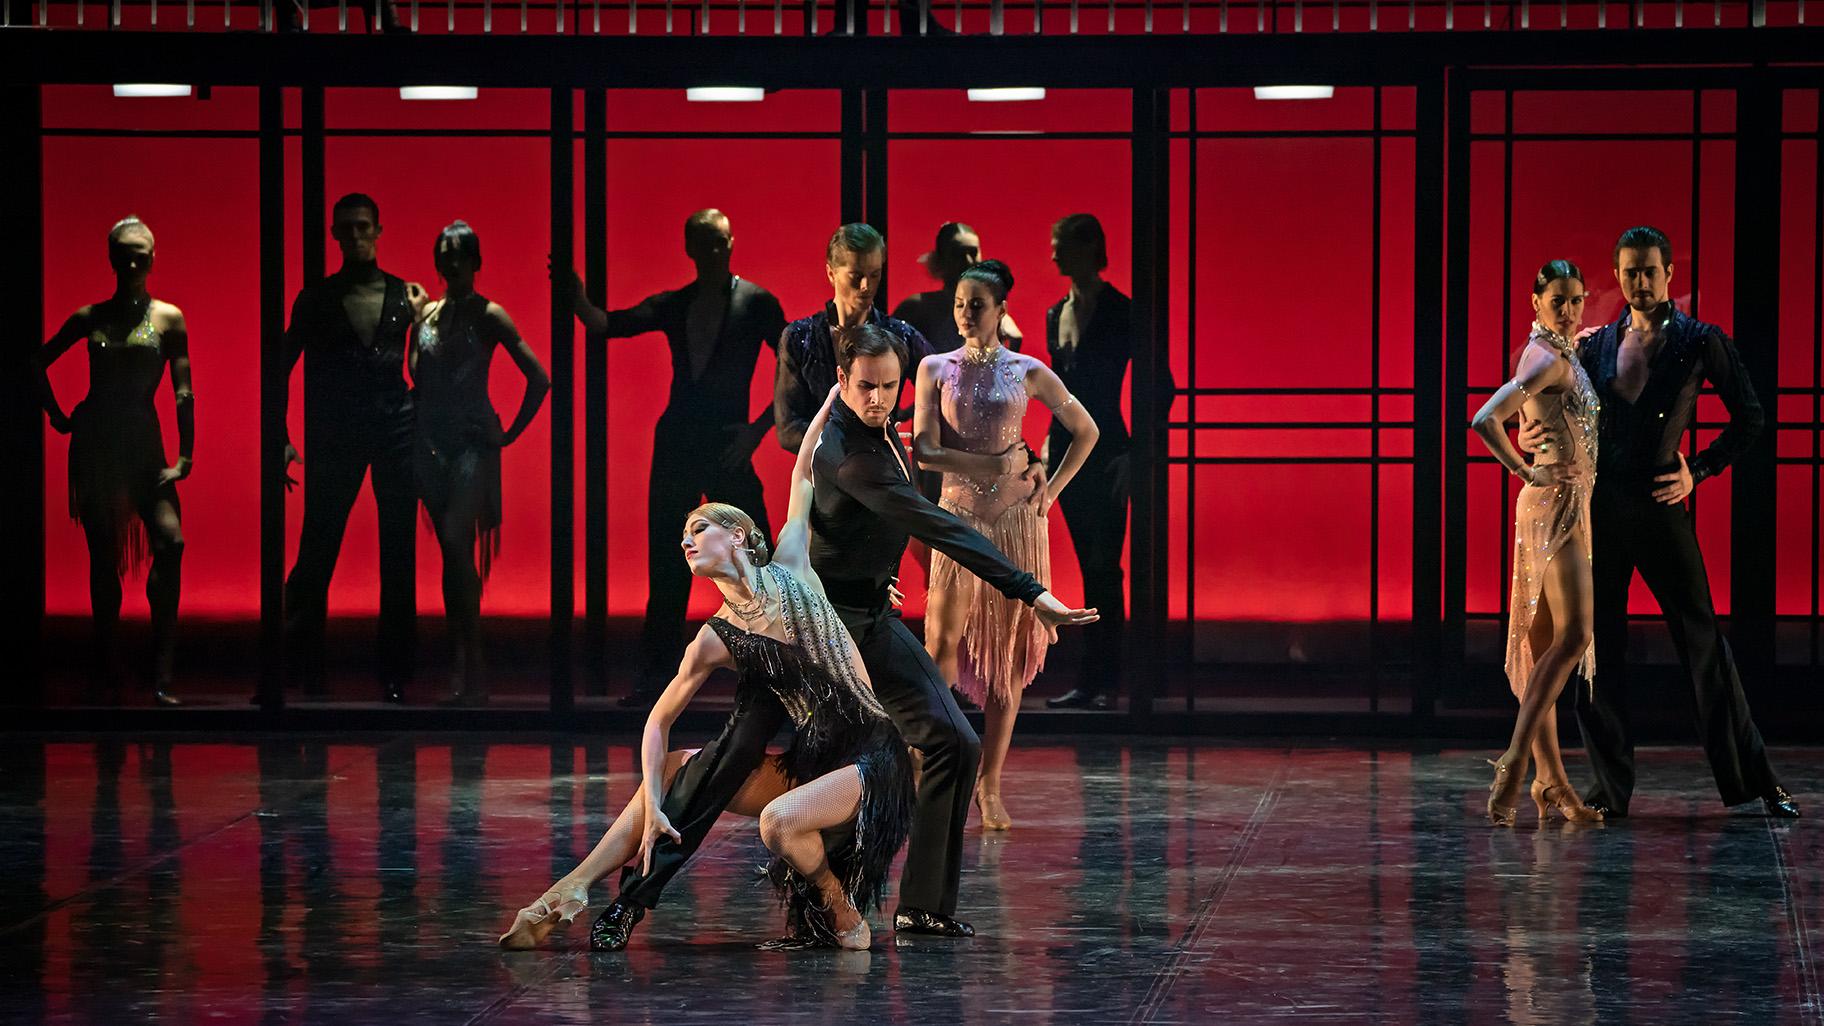 Eifman Ballet of St. Petersburg in “The Pygmalion Effect.” (Photo by Michael Khoury)